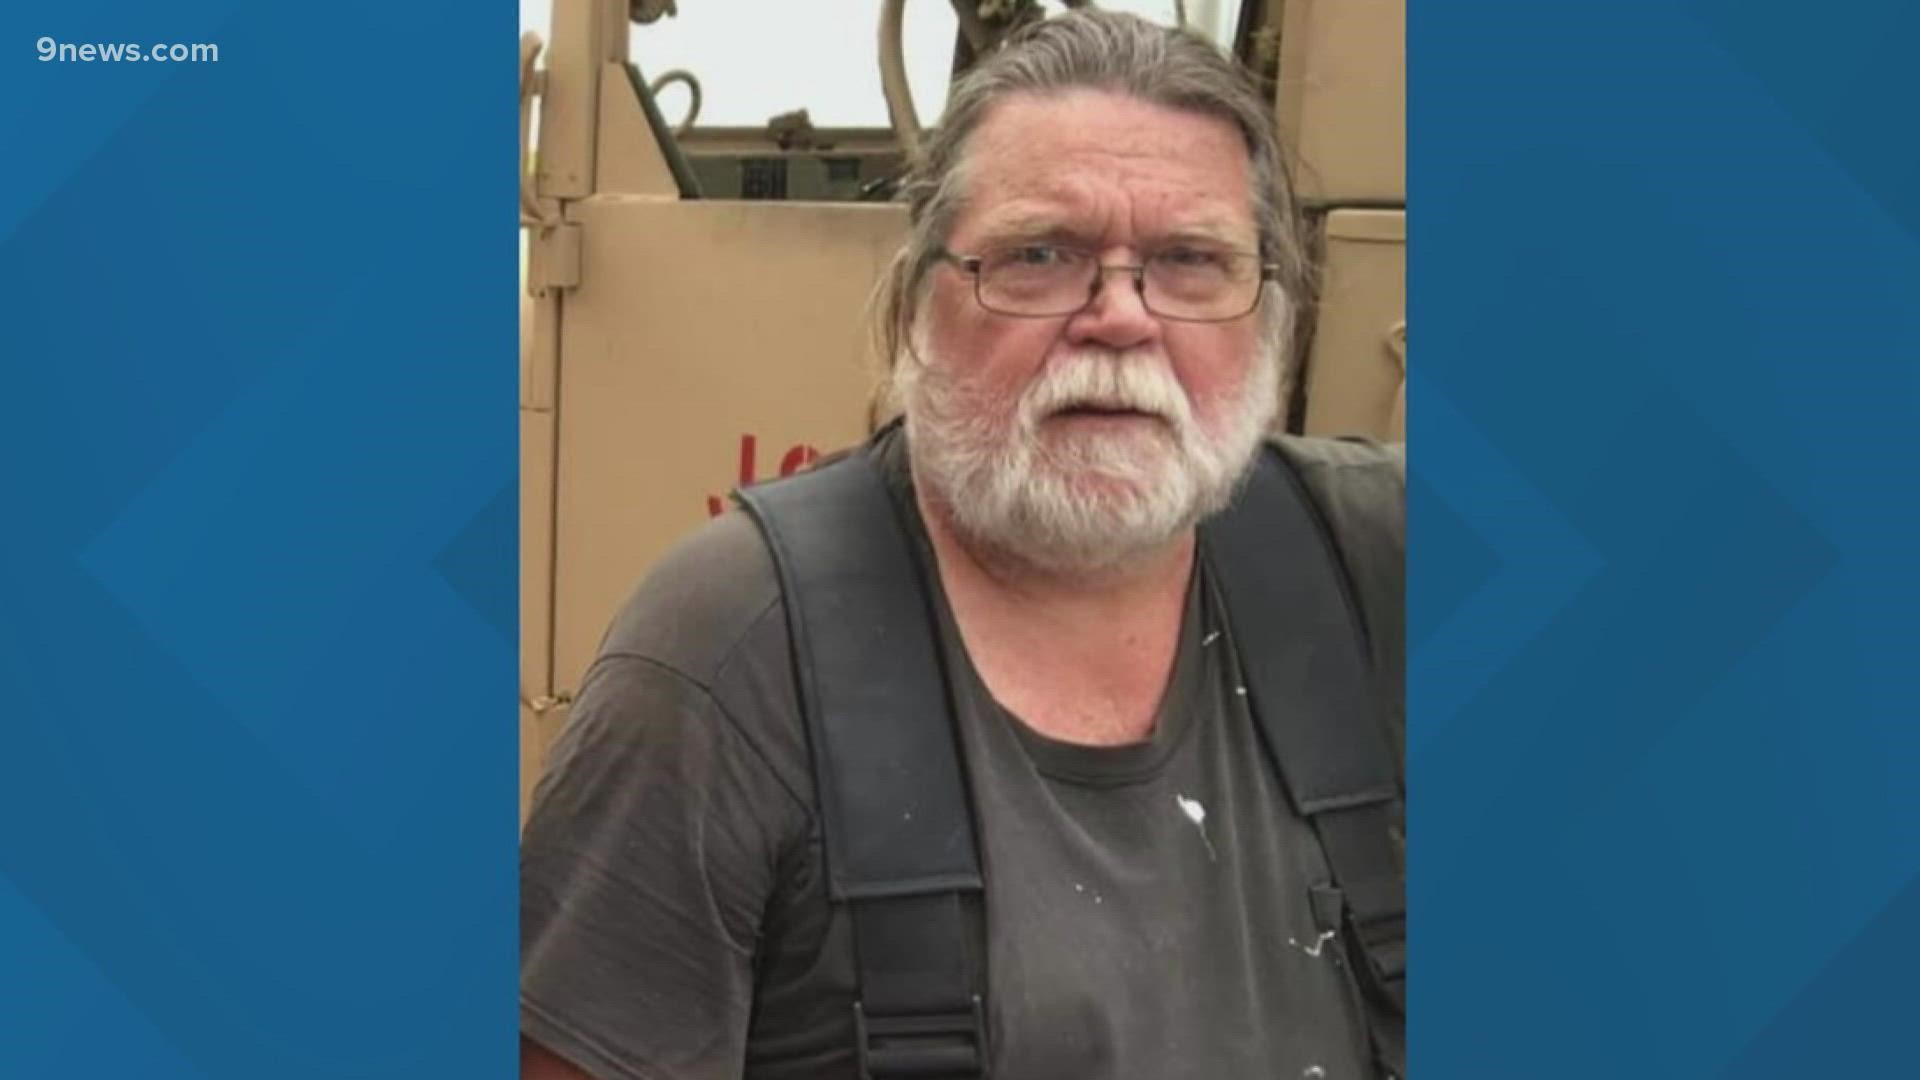 Larry Wyant died Tuesday after a shift in winds pushed the flames toward him, according to the Joes Fire Department.